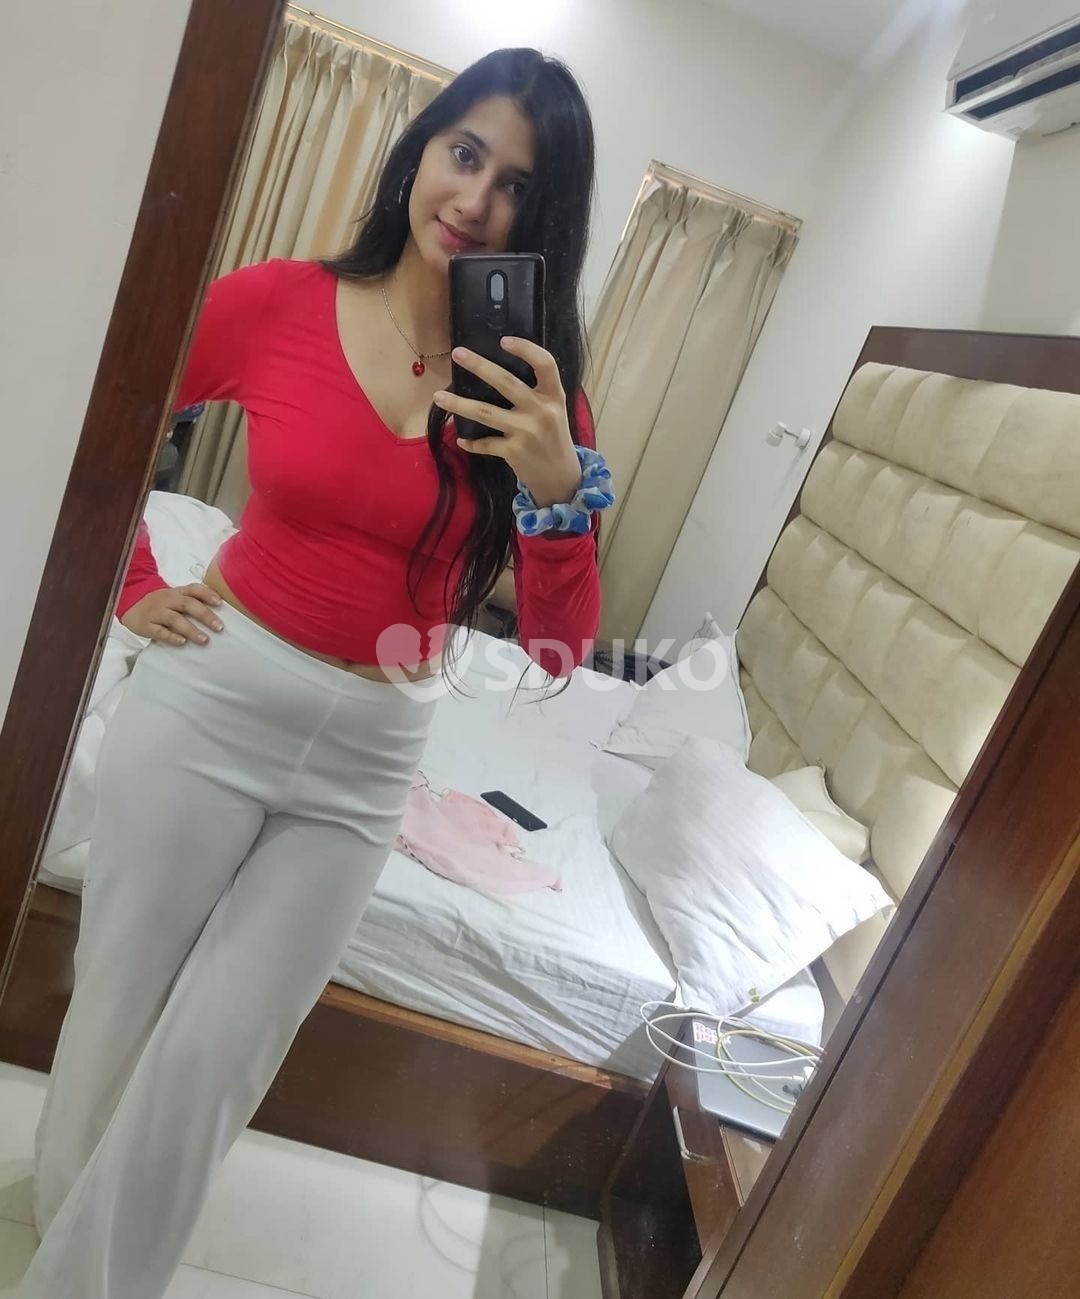 CALL ME MONA MOHALI 988-85-166-43 AND TO HAND PAYMENT CALL ME ANYTIME FOR REAL AND GENUINE SERVICE WITHOUT ANY ADVANCE